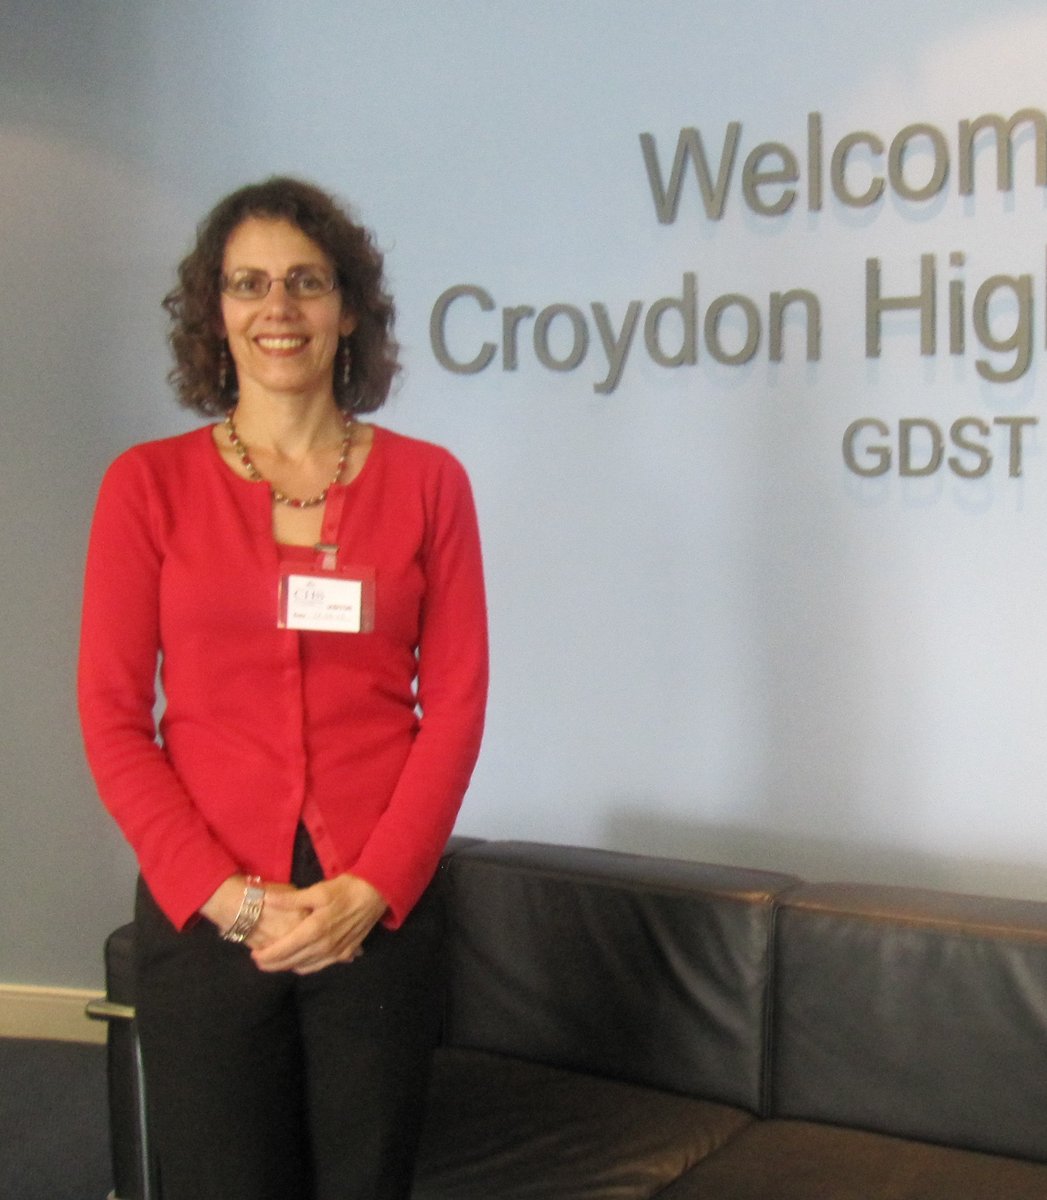 This week's @CroydonHigh Alumna Spotlight is Class of 1984 Professor Amira K. Bennison, Professor in the History and Culture of the Maghrib at the University of Cambridge bit.ly/ProfessorAmira… @GDSTAlumnae  #everygirleveryday #aspirewithoutlimits #gdst